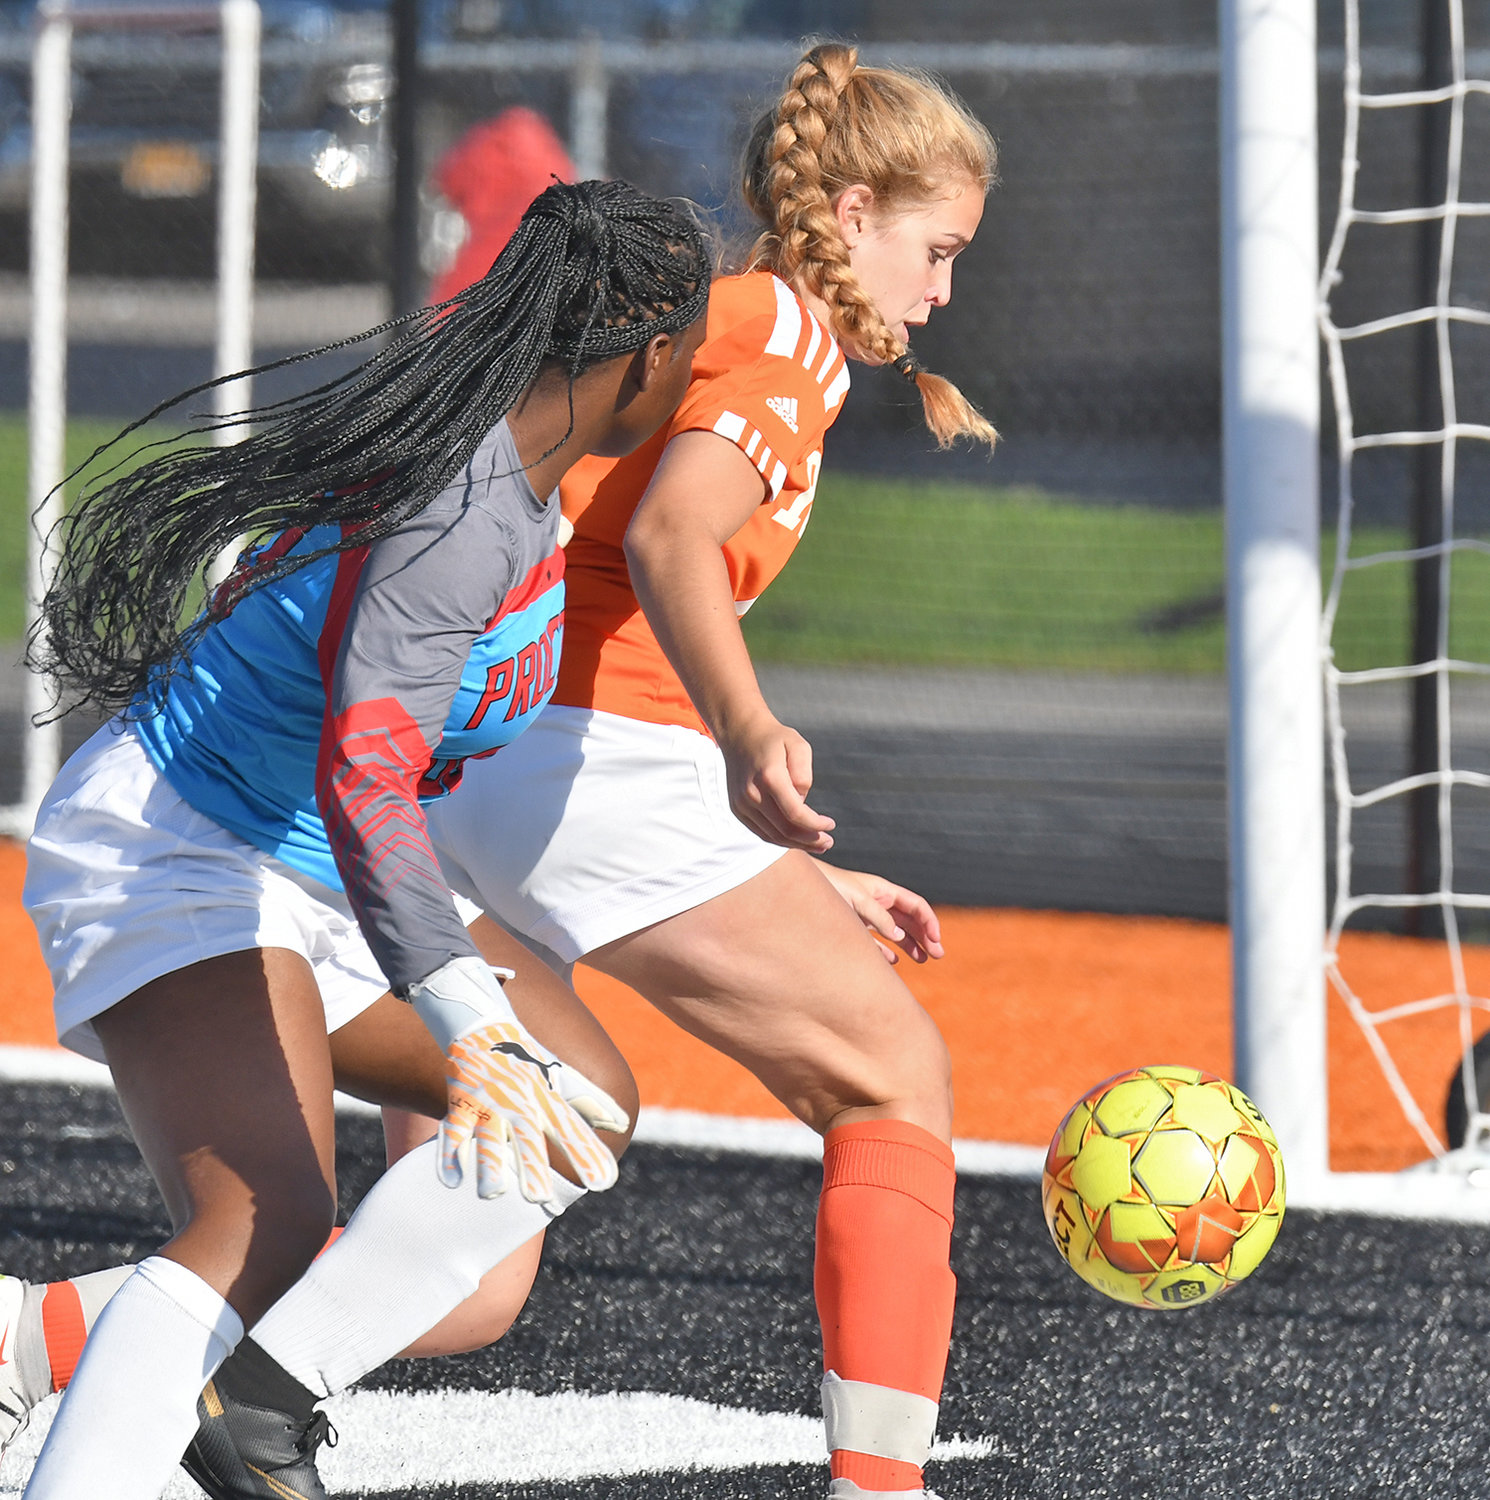 Rome Free Academy's Amelia Furbeck gets behind the Utica Proctor goalie to score RFA's first goal Thursday night at RFA Stadium. She tallied twice for the Black Knights and the hosts won 10-0.